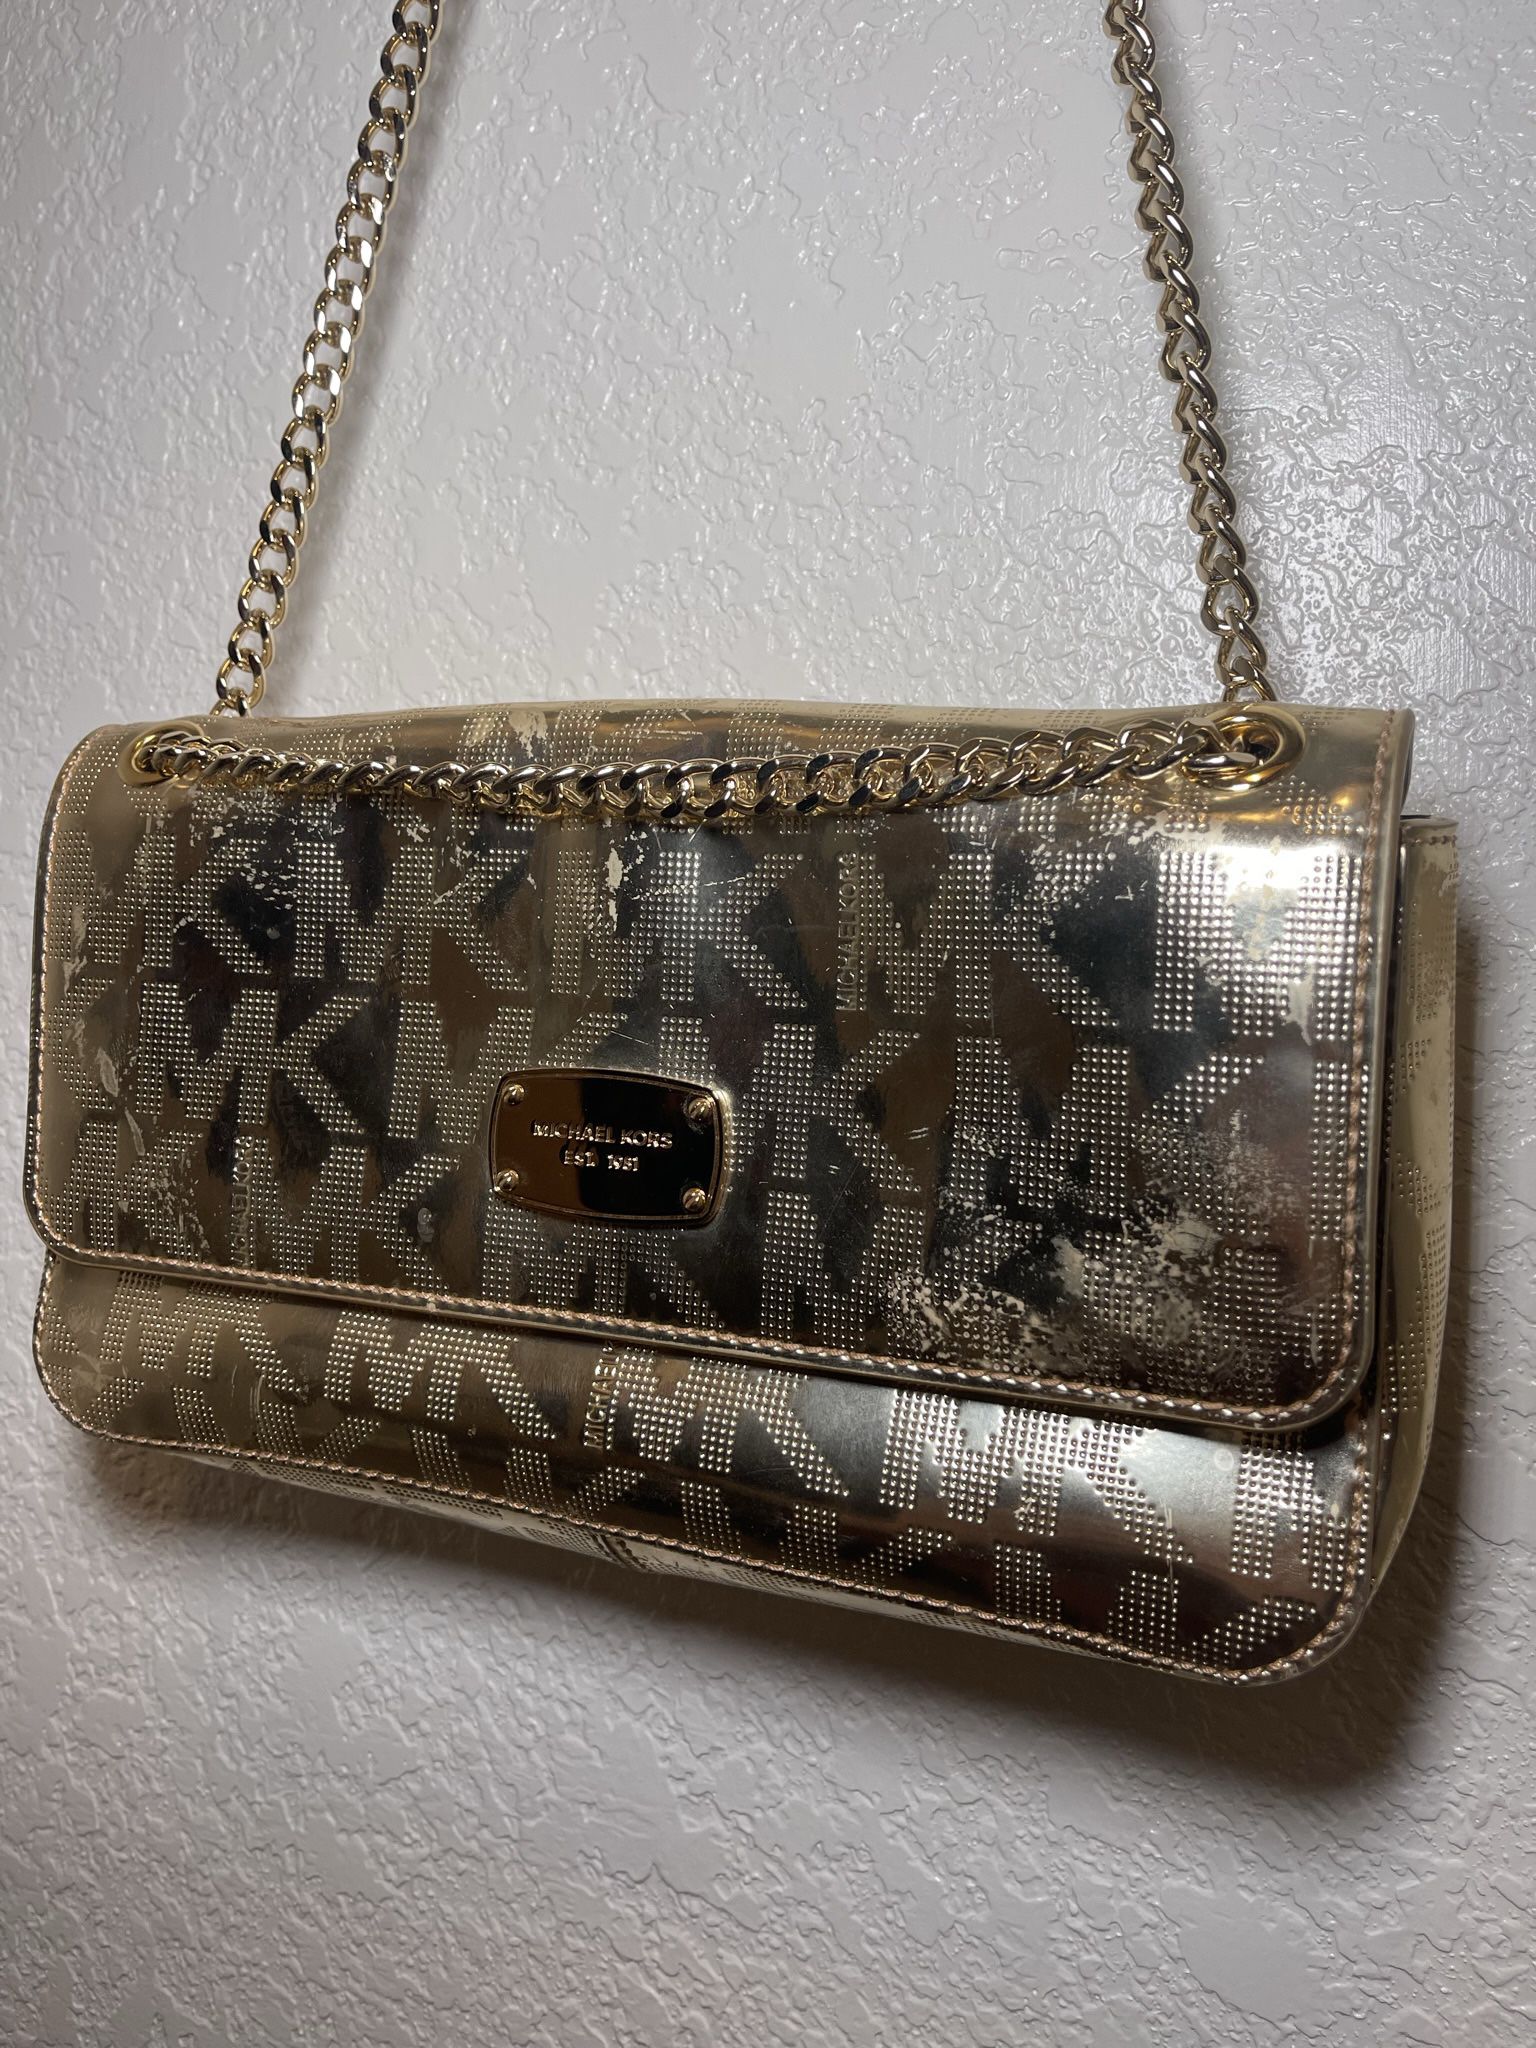 Michael Kors Gold Bag with Cuban Chain Link Double Strap